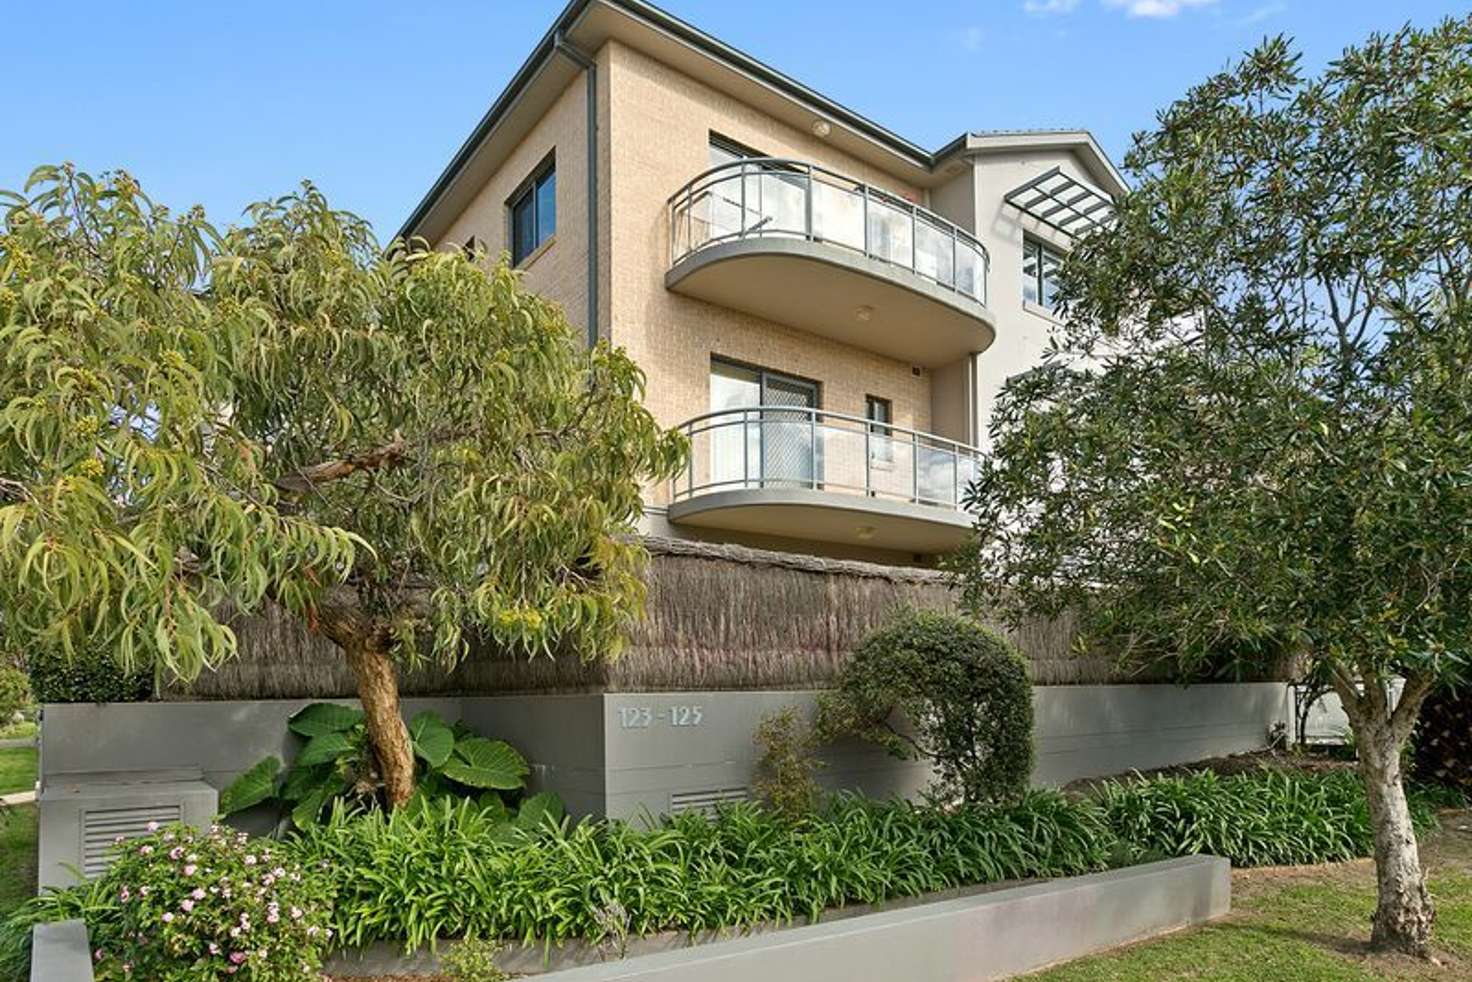 Main view of Homely apartment listing, 1/123 Gerrale Street, Cronulla NSW 2230